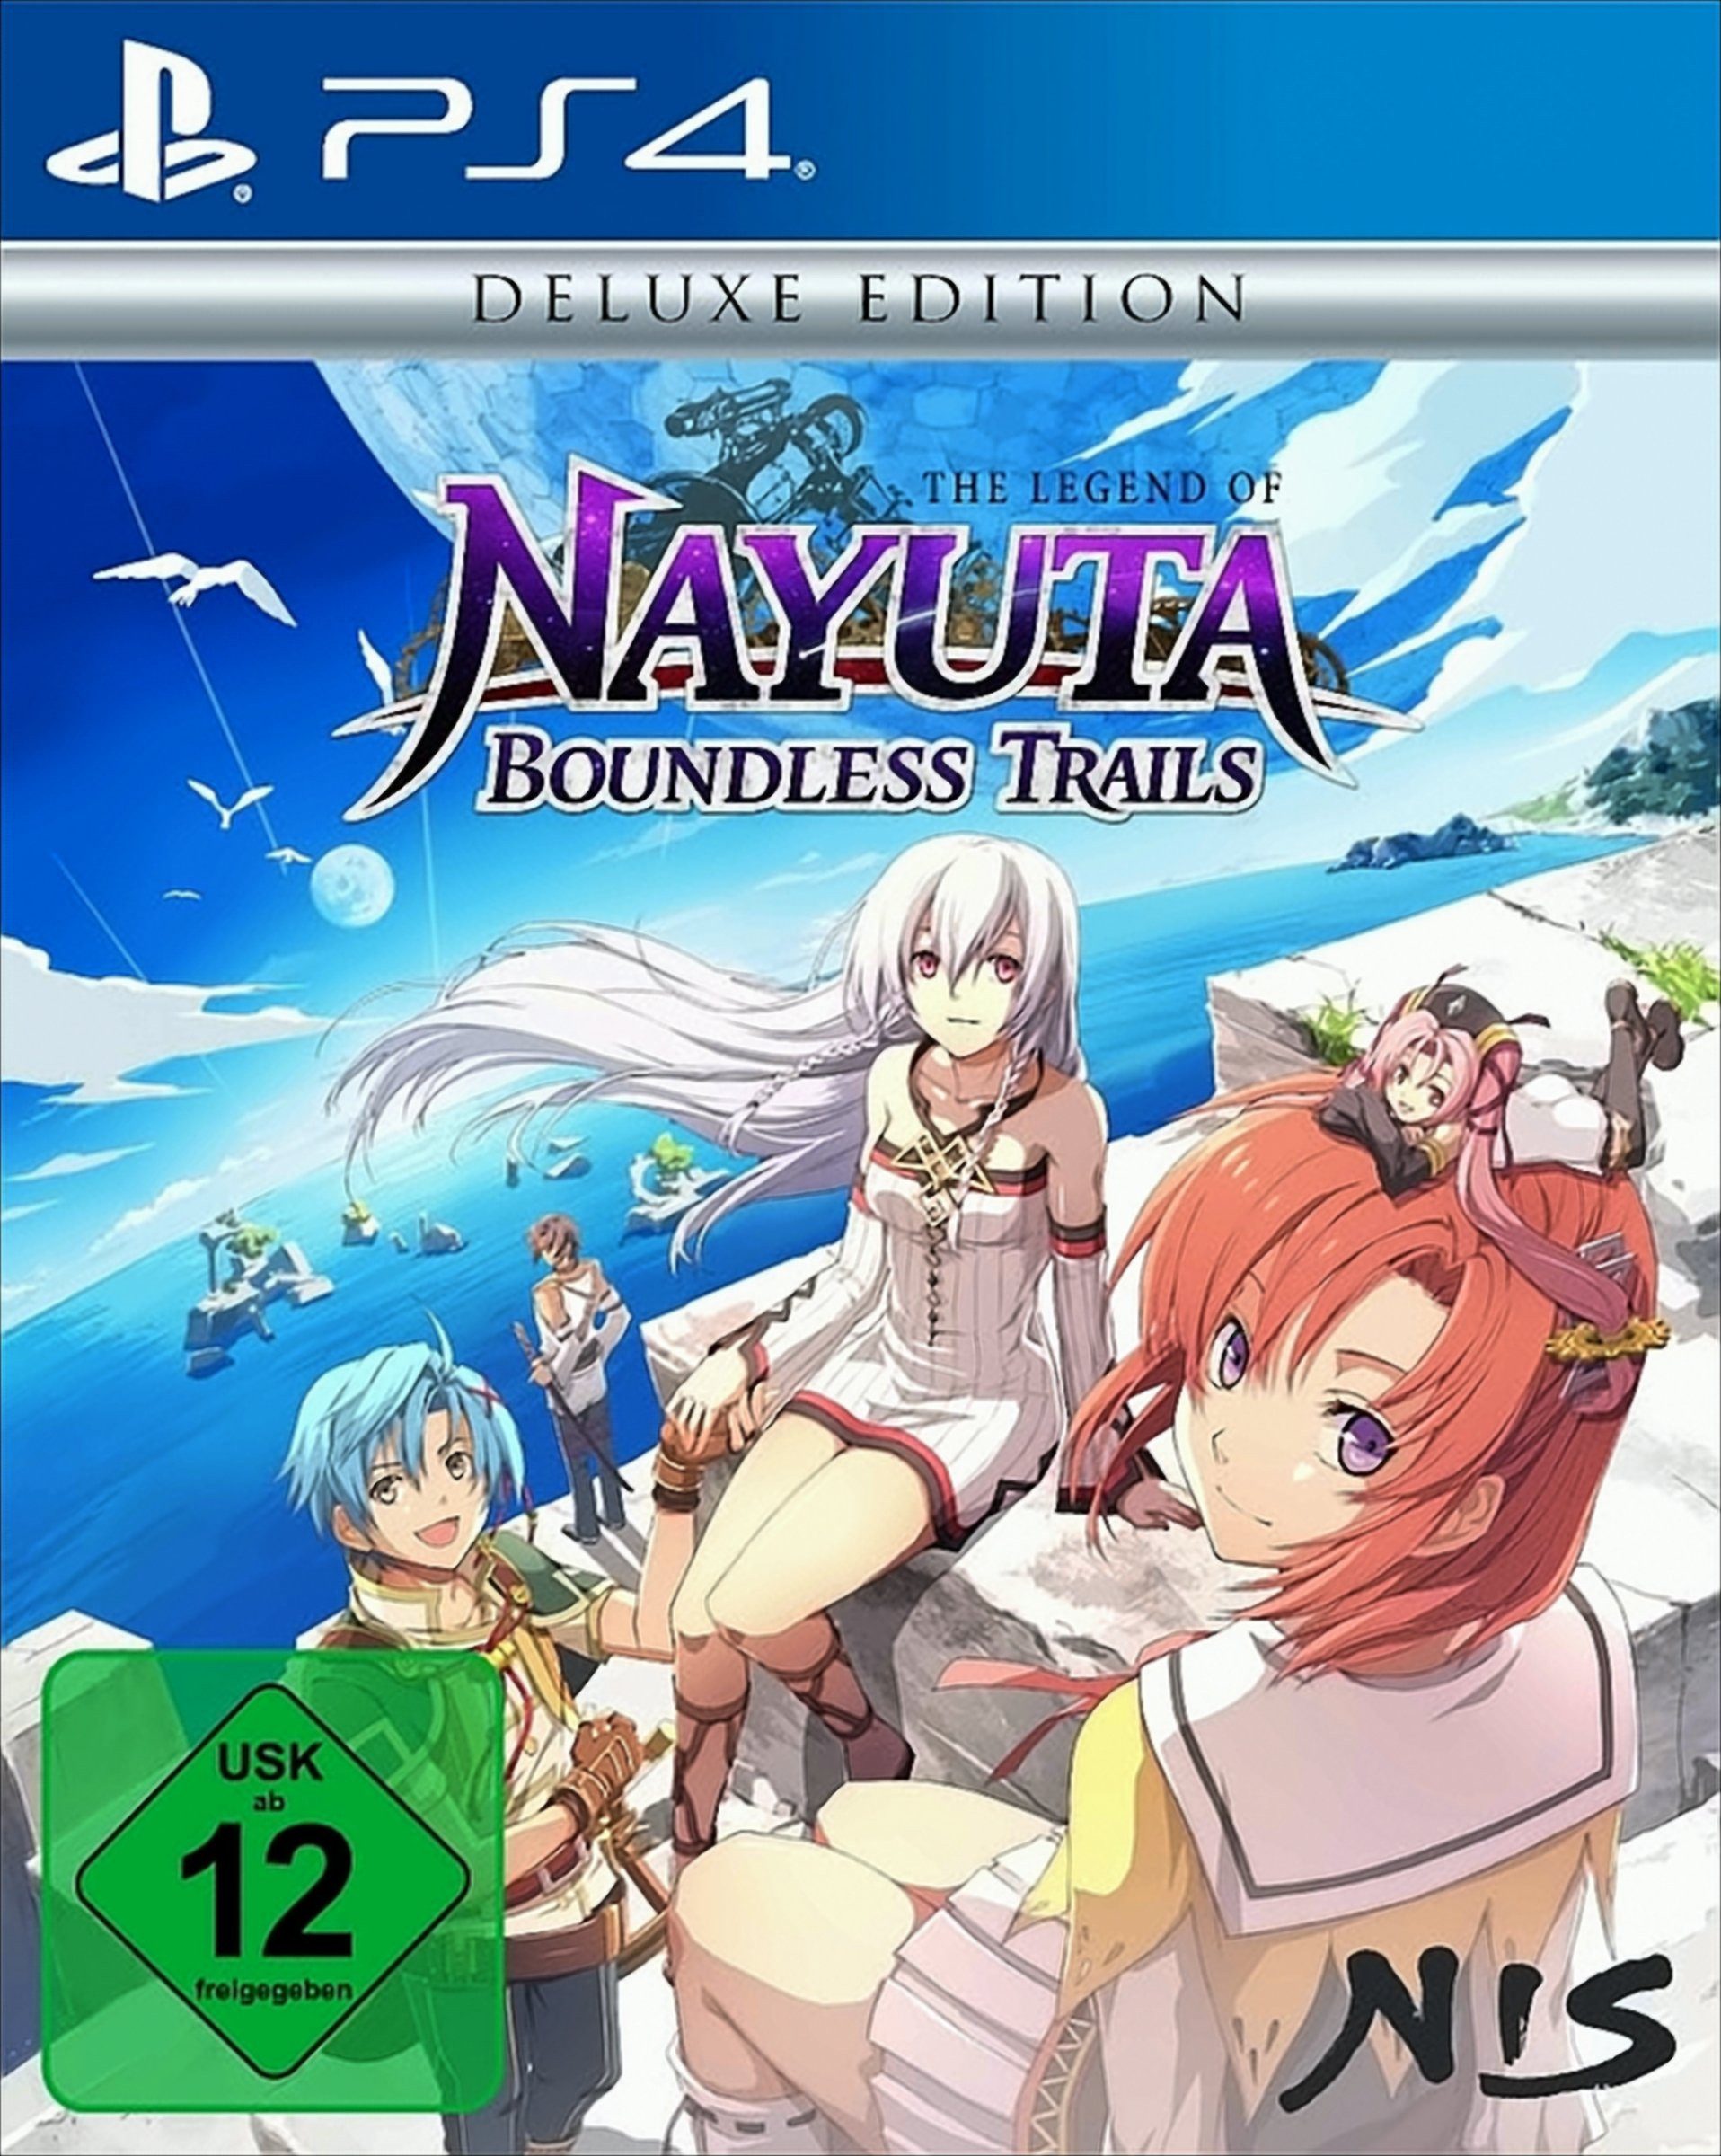 The Legend of Nayuta: Boundless Trails - Deluxe Edition (PS4) Playstation 4